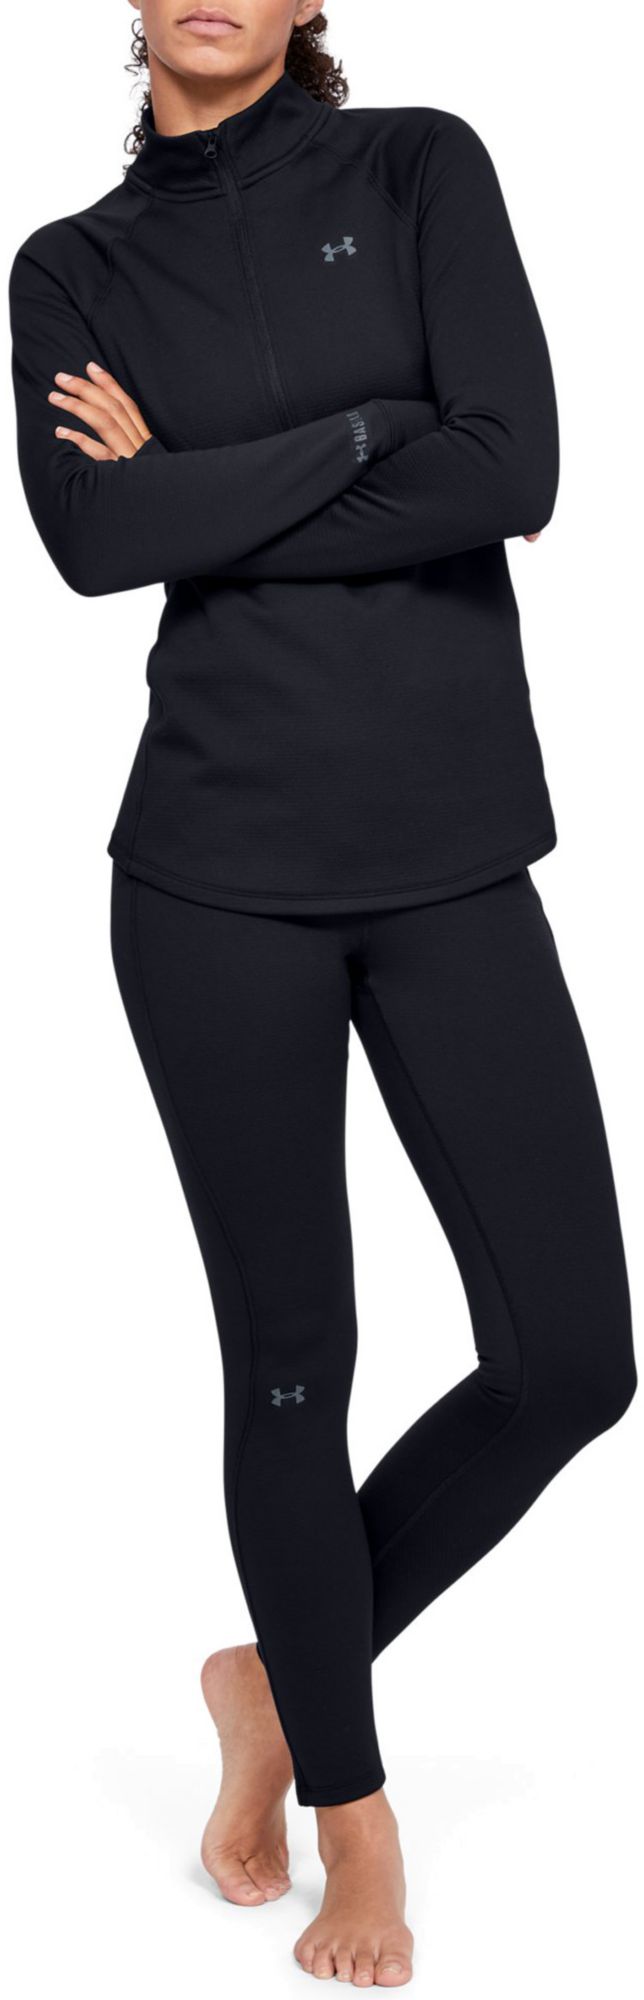 under armour women's base layer